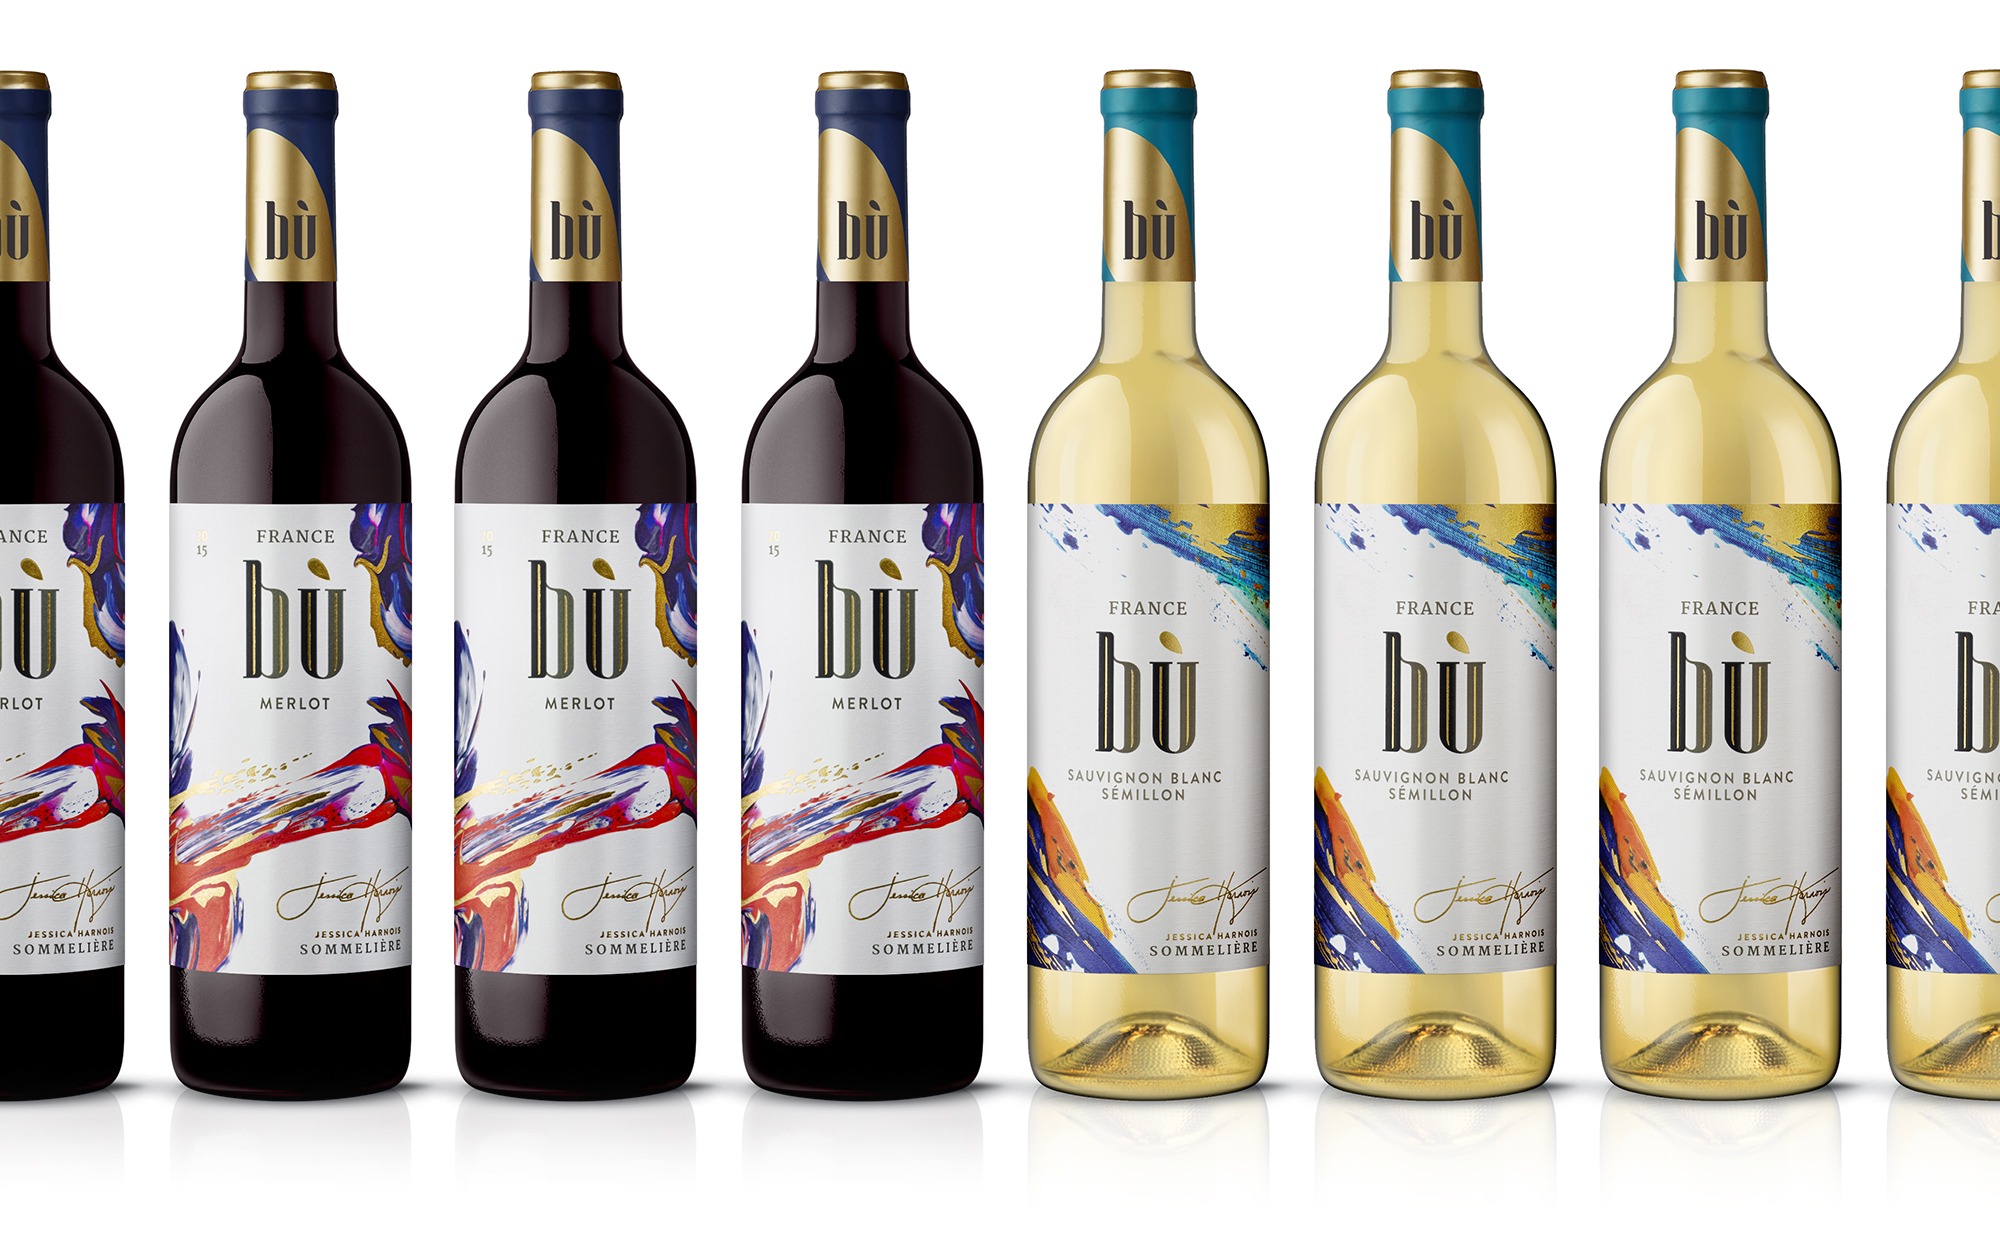 Bu France Wine Label Design | Dossier Creative | Cross Channel Wine Brand with Boutique Flair